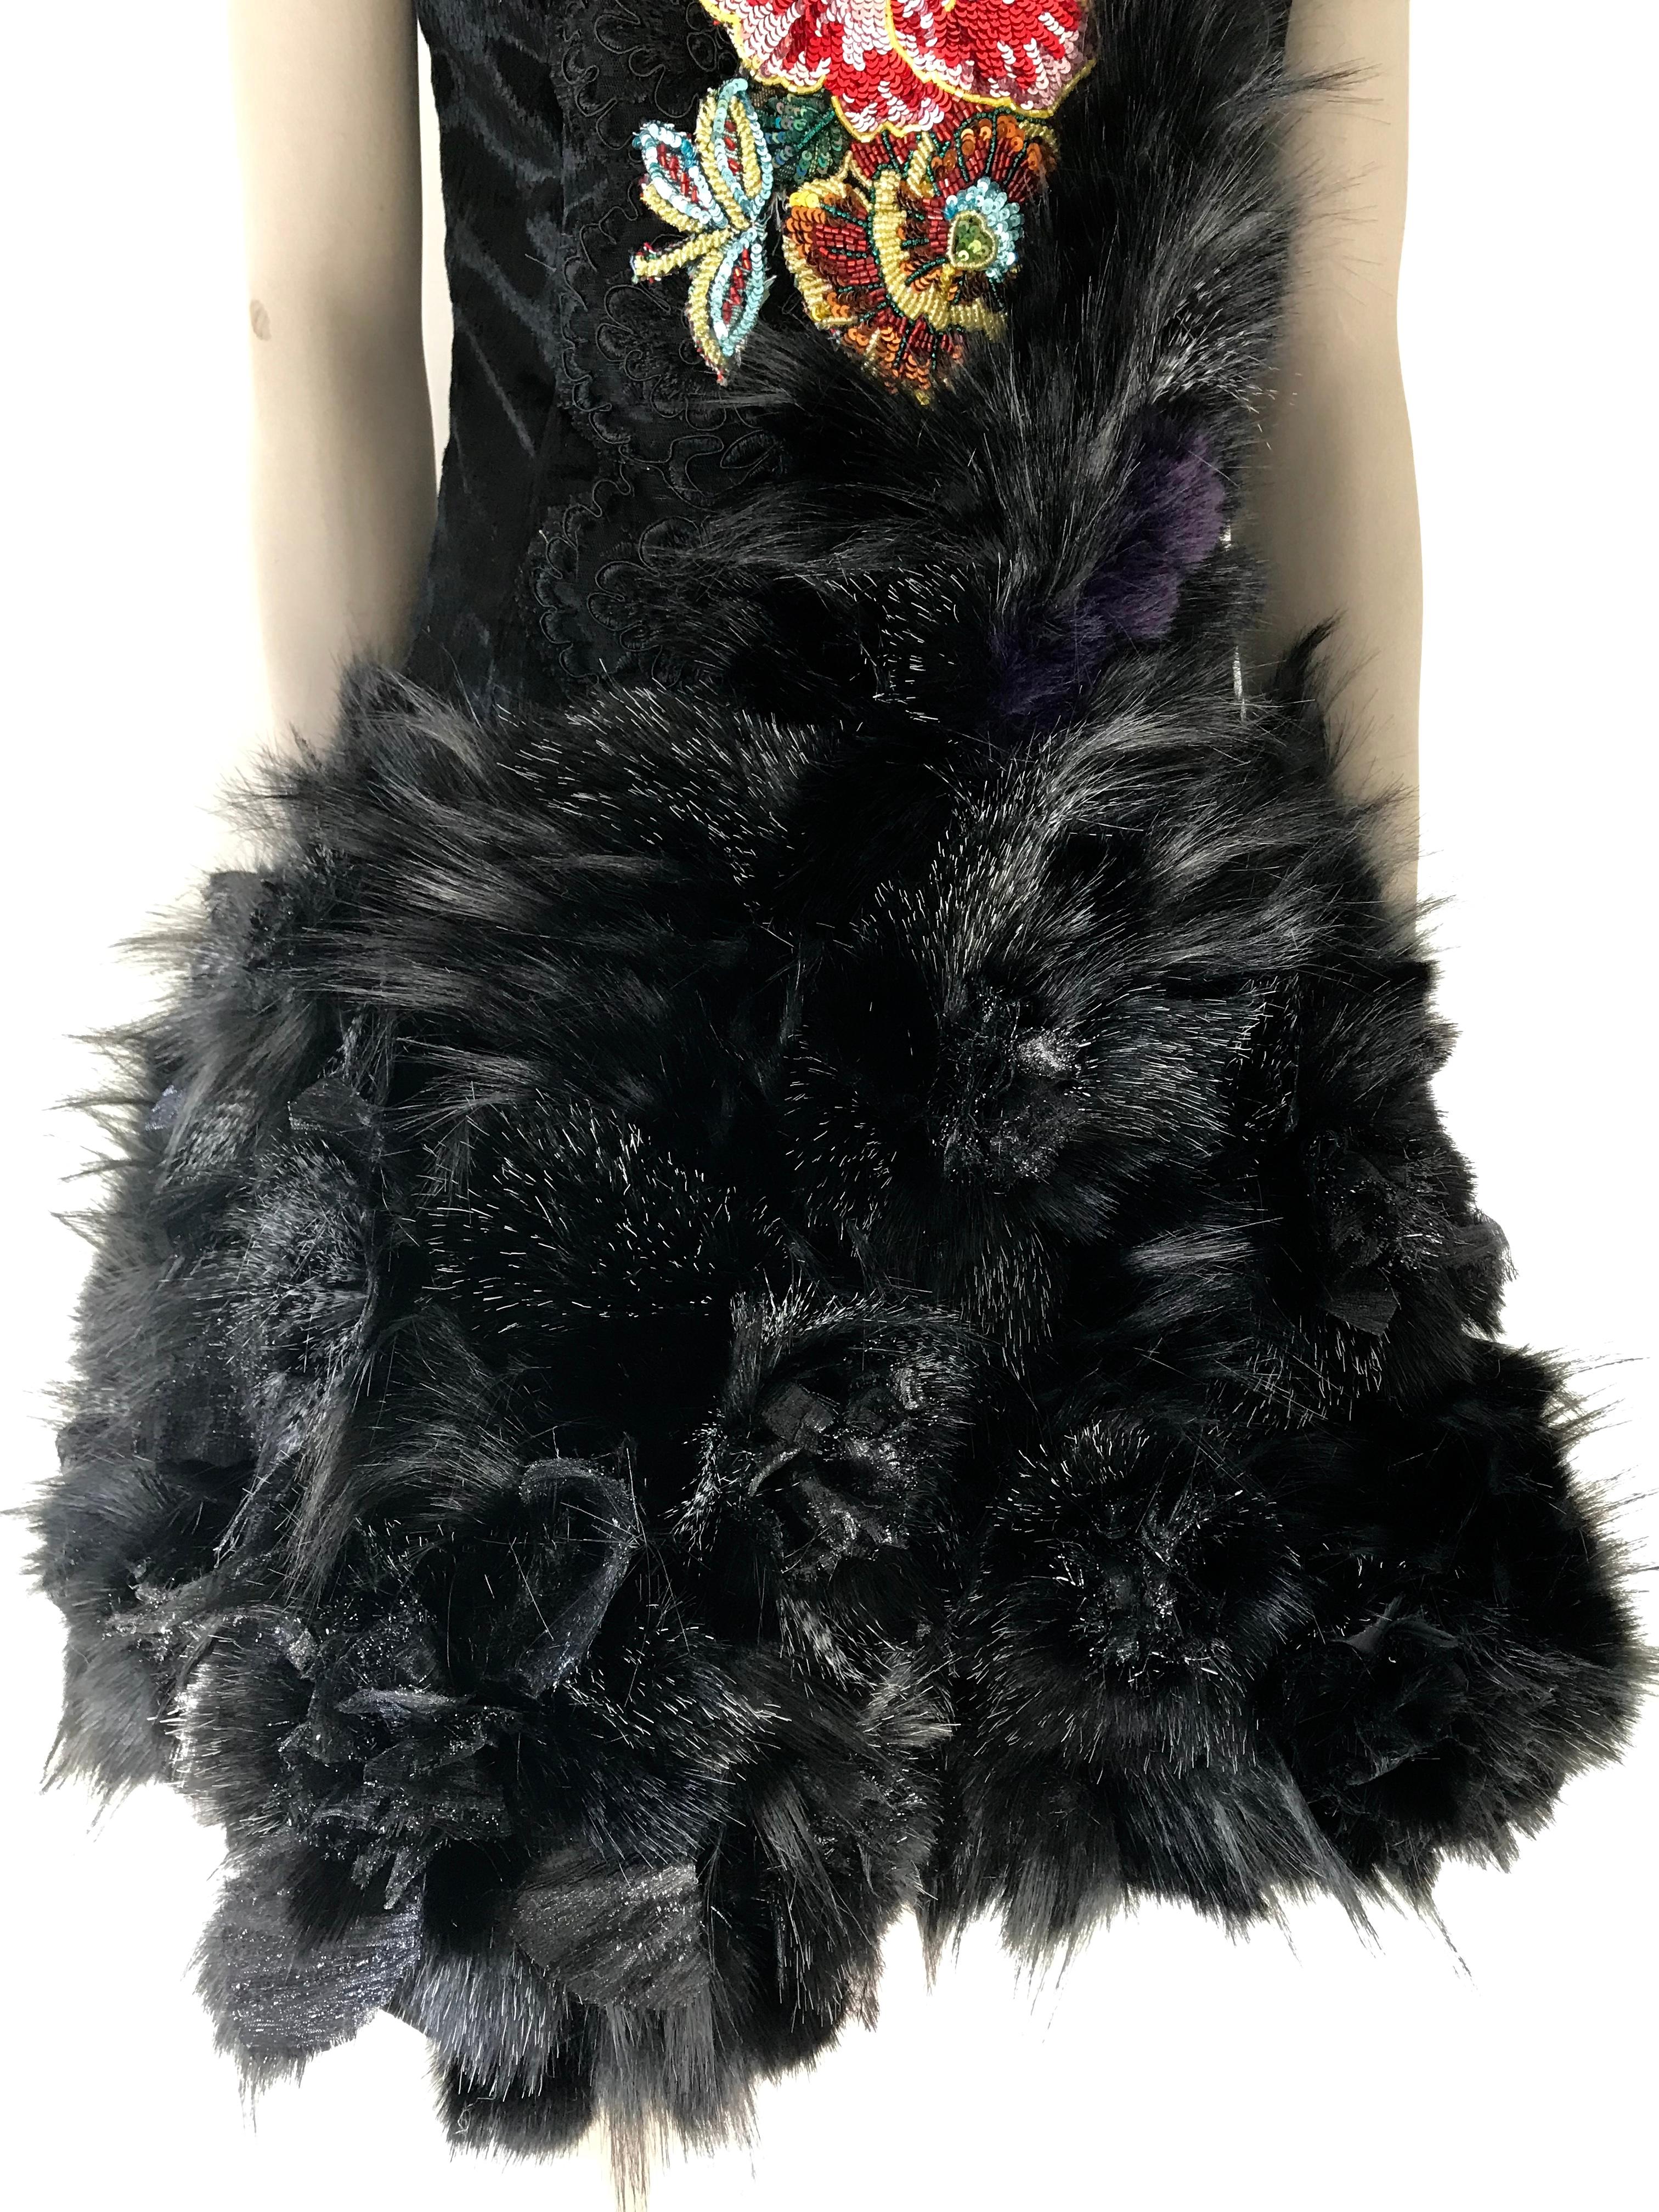 Pelush Black Faux Fur Dress With Three Dimensional Flowers And Embroidery - Sl For Sale 2